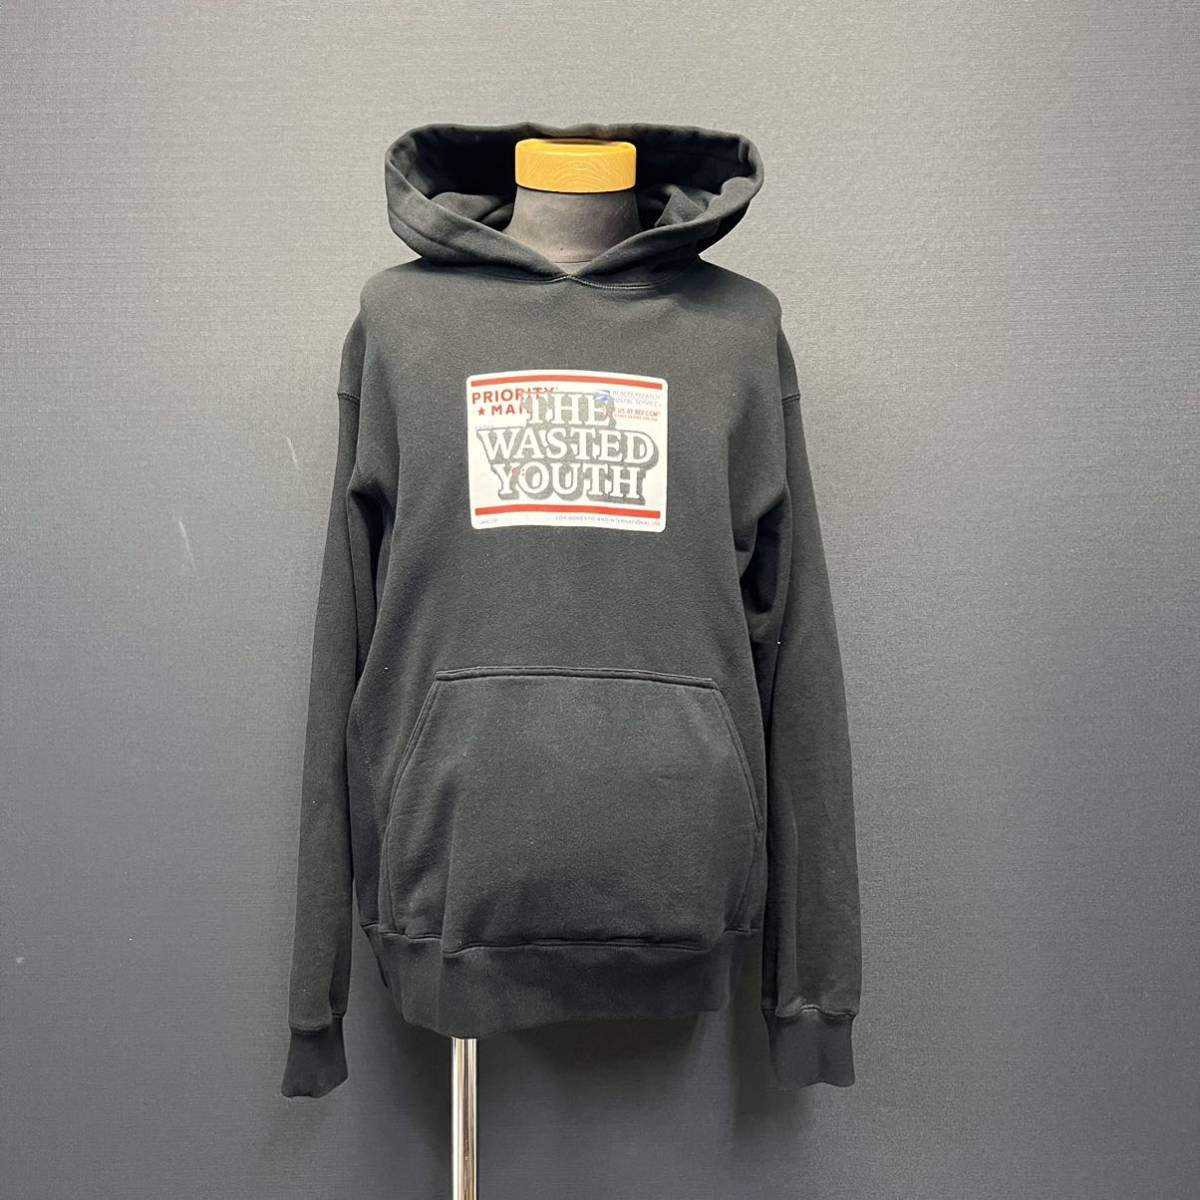 THE BLACK EYE PATCH 21SS WASTED YOUTH LABEL HOODIE ブラックアイパッチ ウエステッドユース レーベル フーディー size M